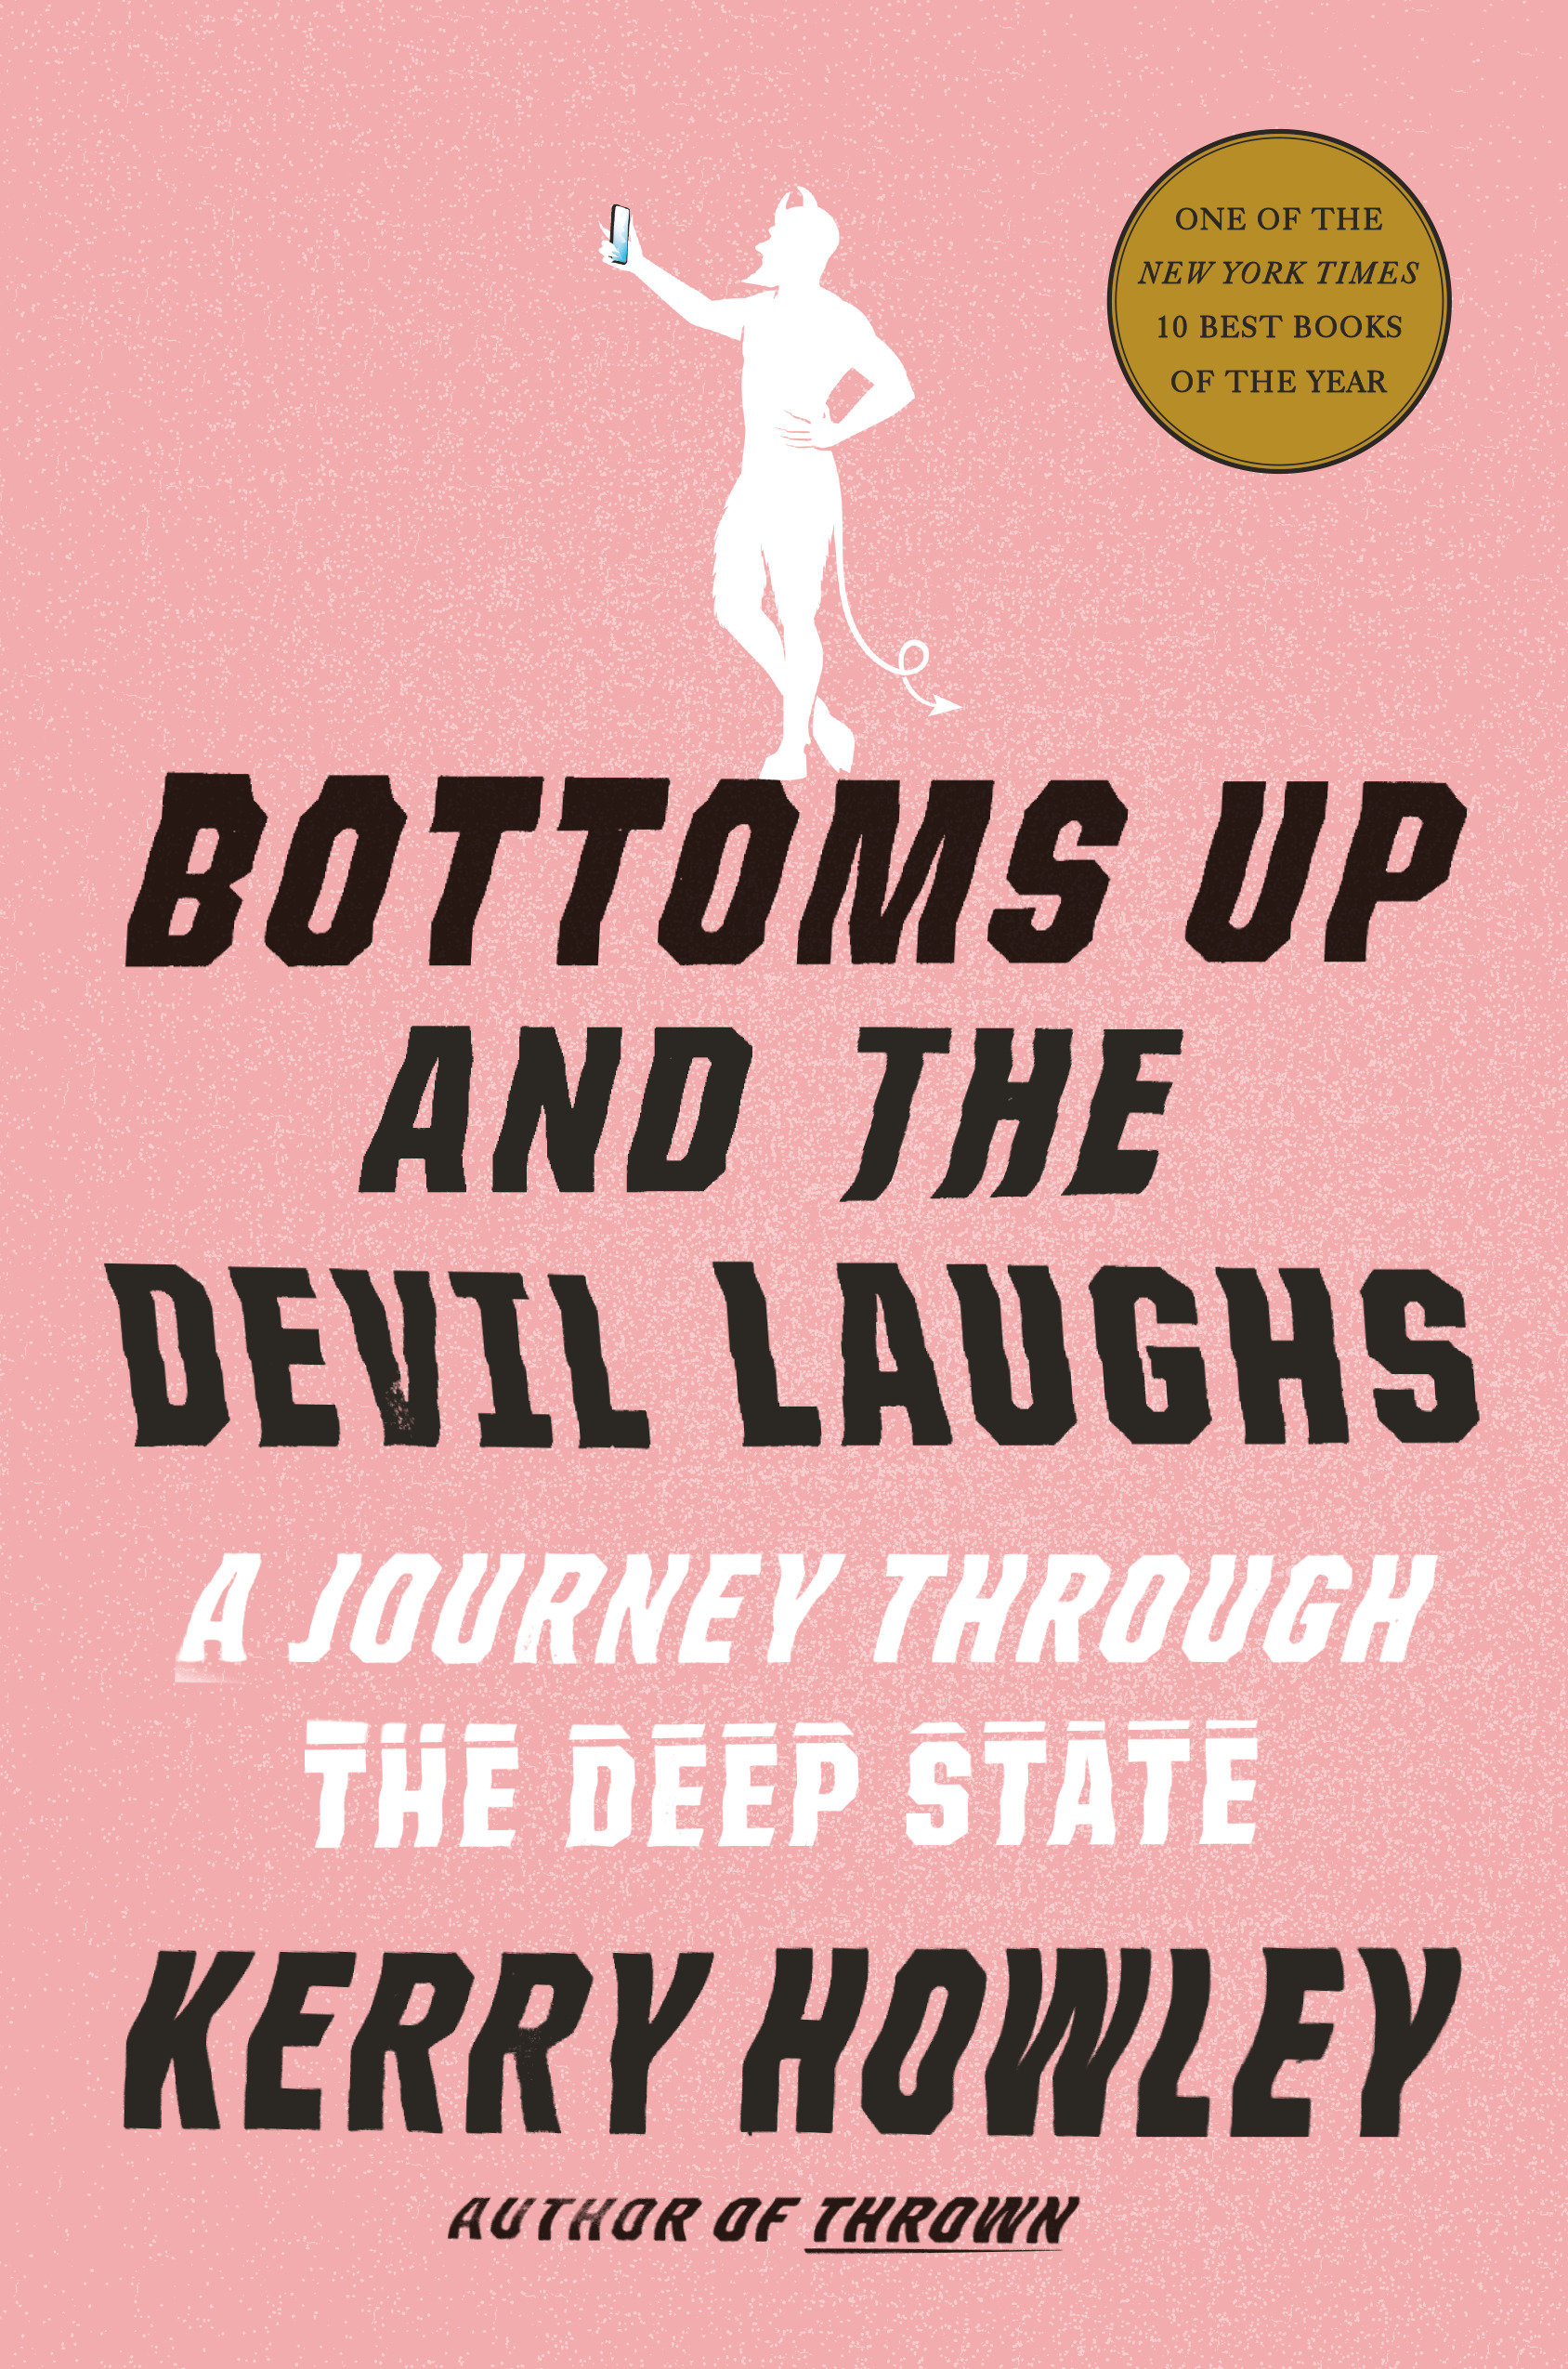 Bottoms Up and the Devil Laughs (Hardcover Book)